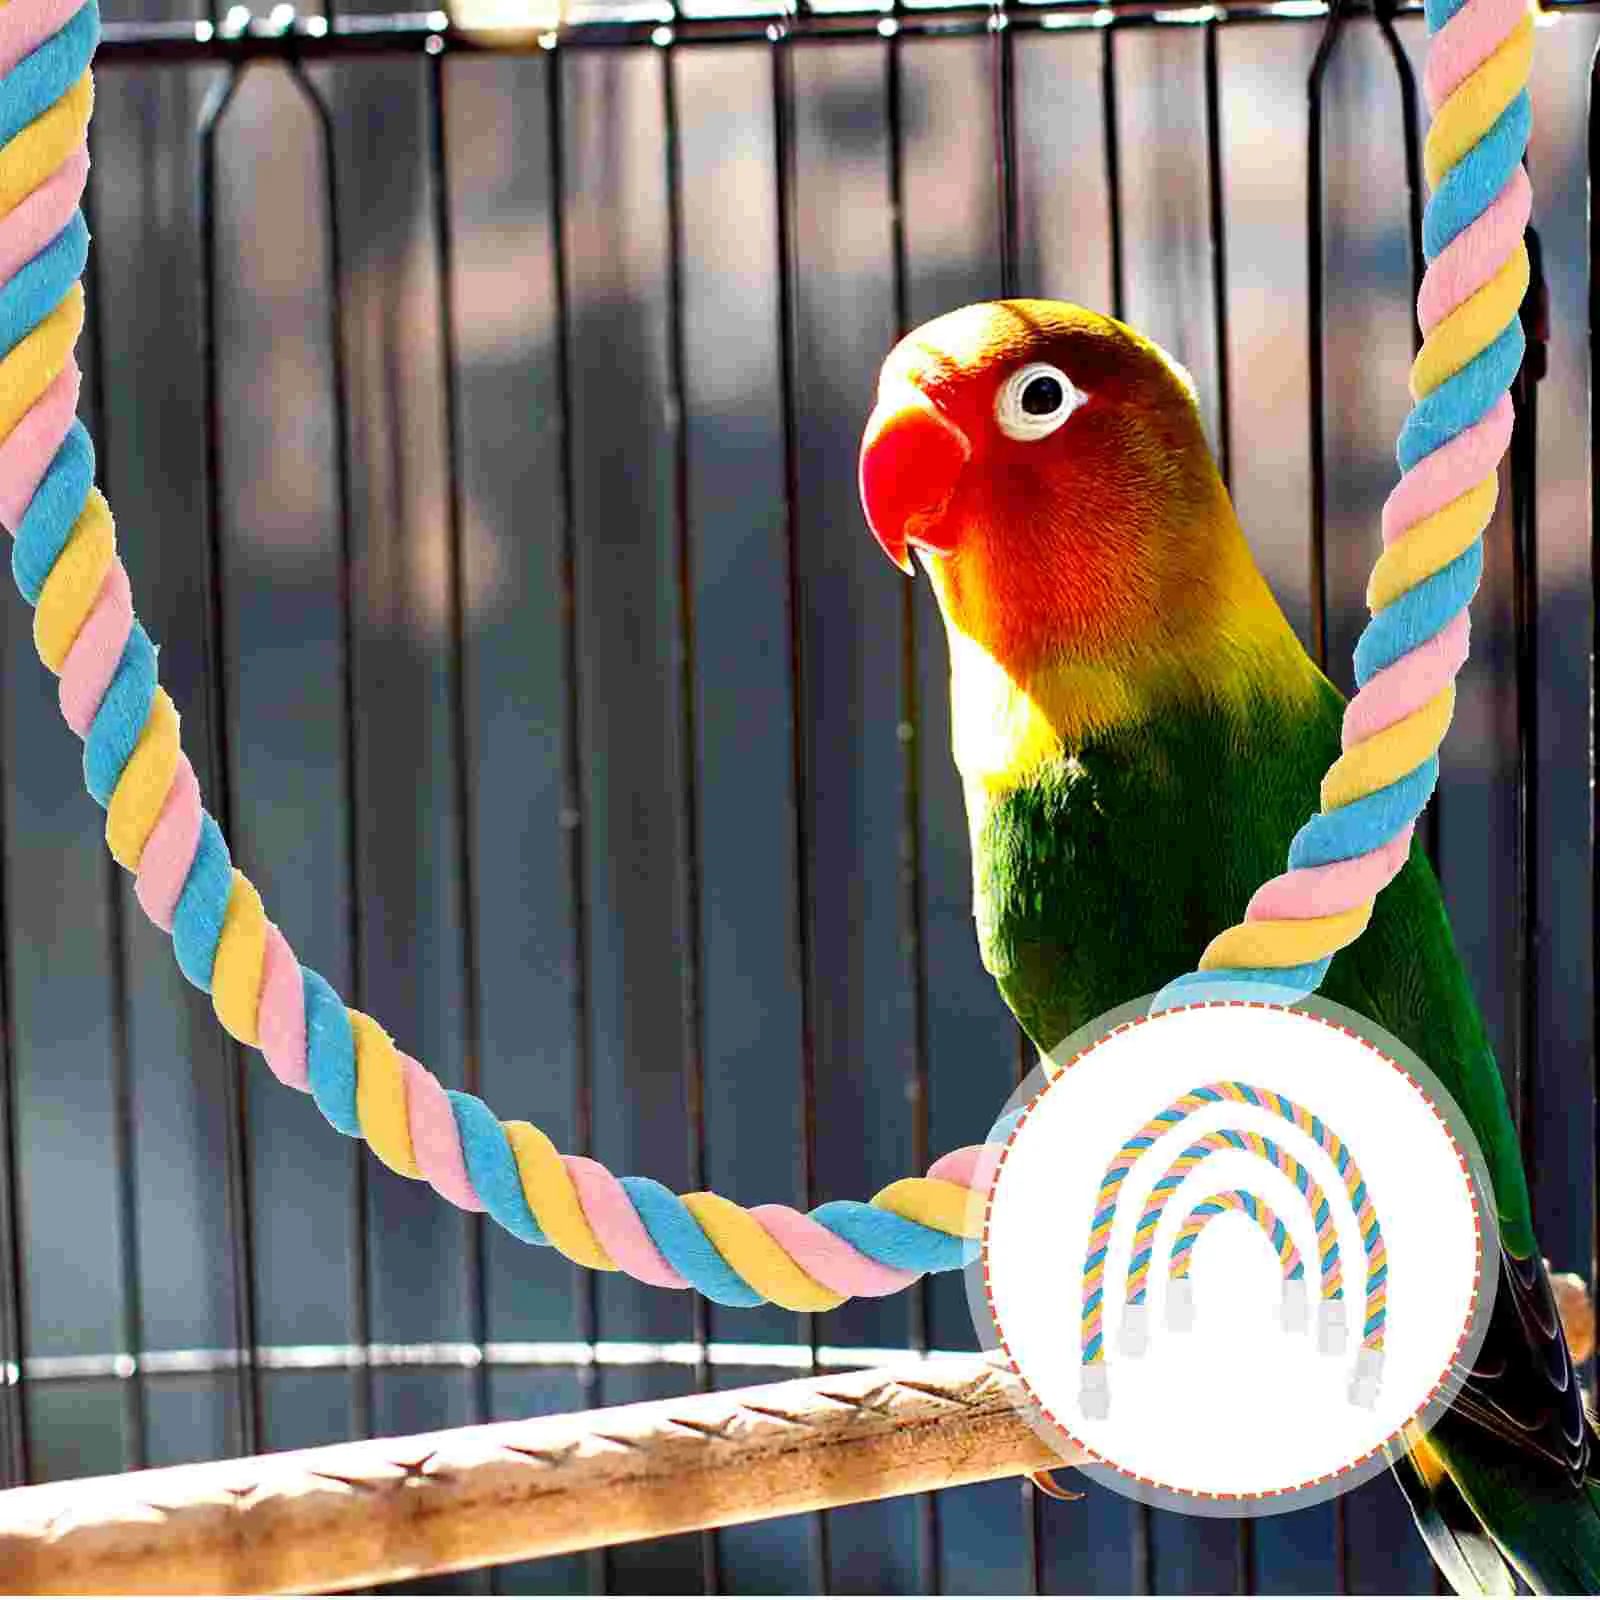 

3 Pcs Parrot Climbing Cotton Rope Toys for Bird Creative Playing Lanyard Pet Interesting Birdcage Funny Stands